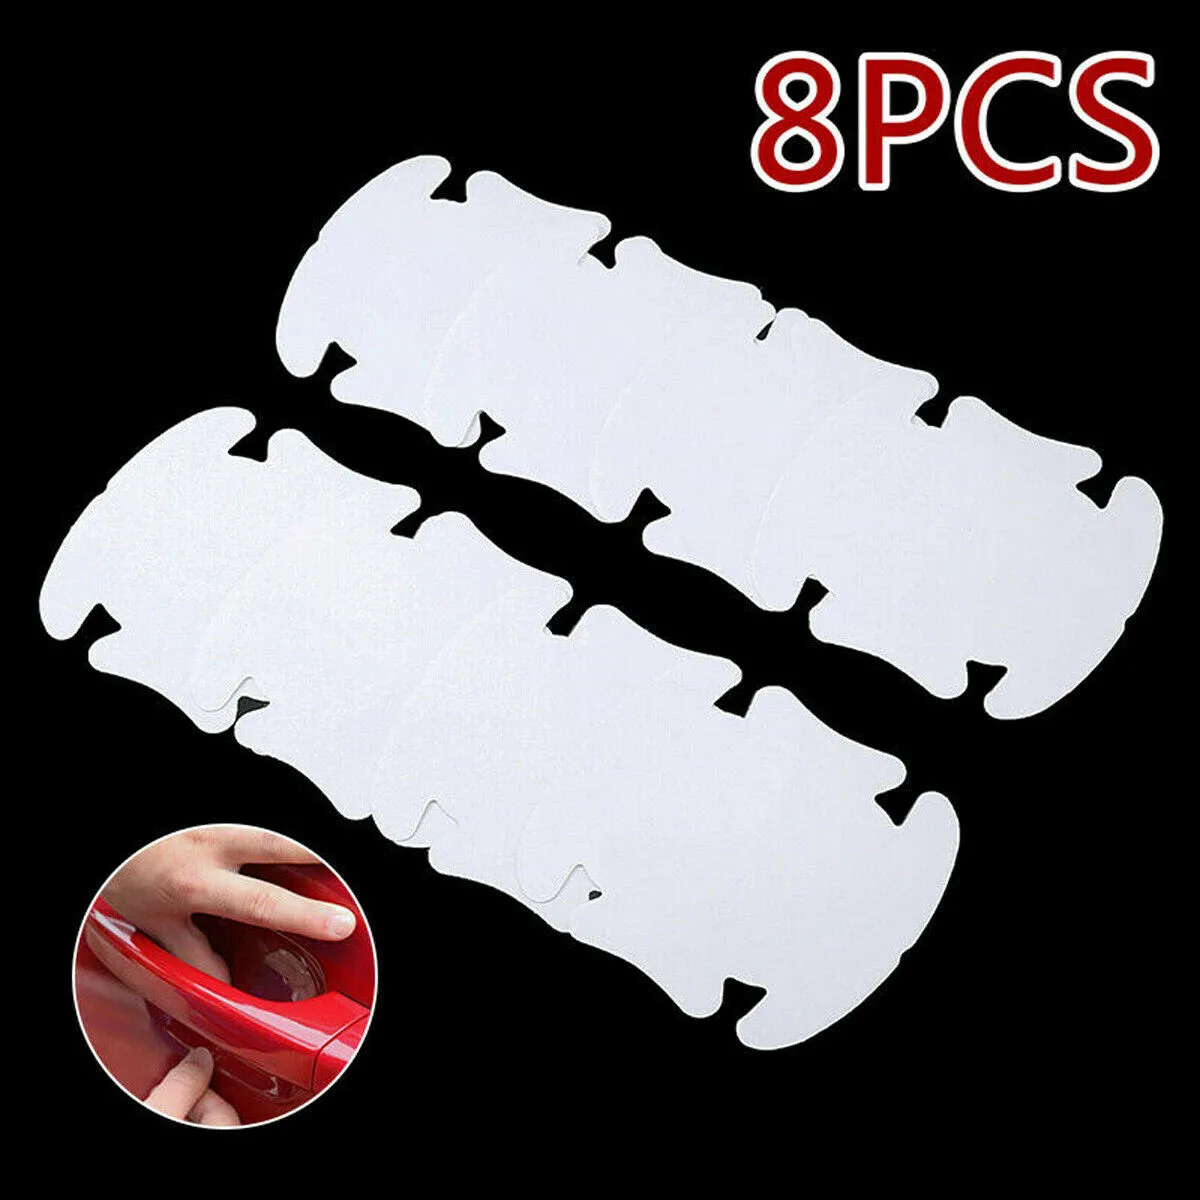 

For Bmw E46 Universal 8pcs Invisible Clear Car Door Handle Paint Scratch Protector Guard Film Sheet Automotive Goods